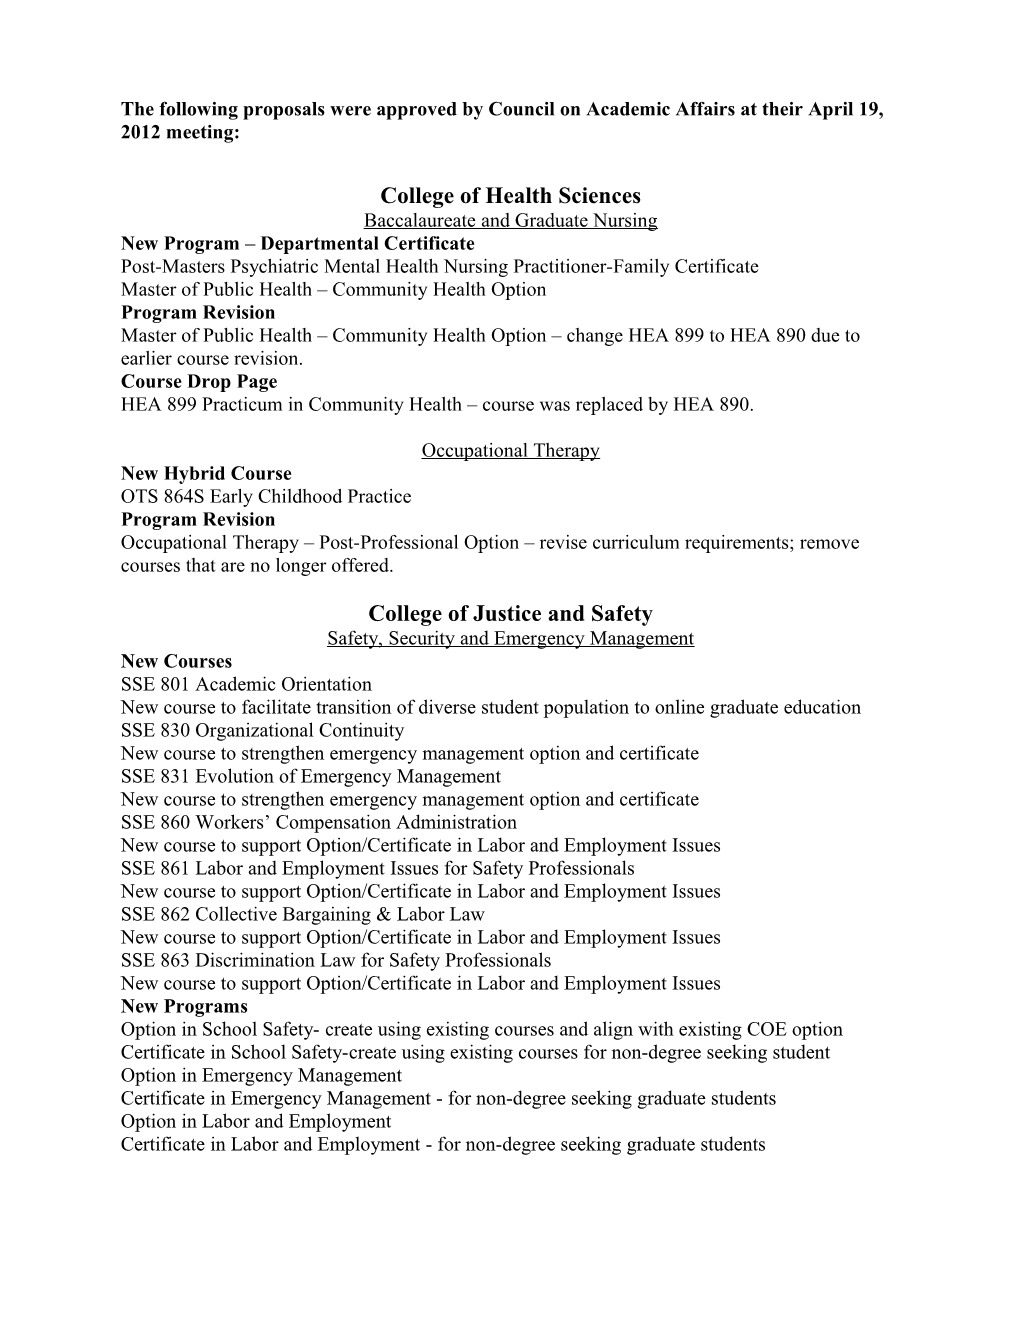 The Following Proposals Were Approved by Council on Academic Affairs at Their April 19